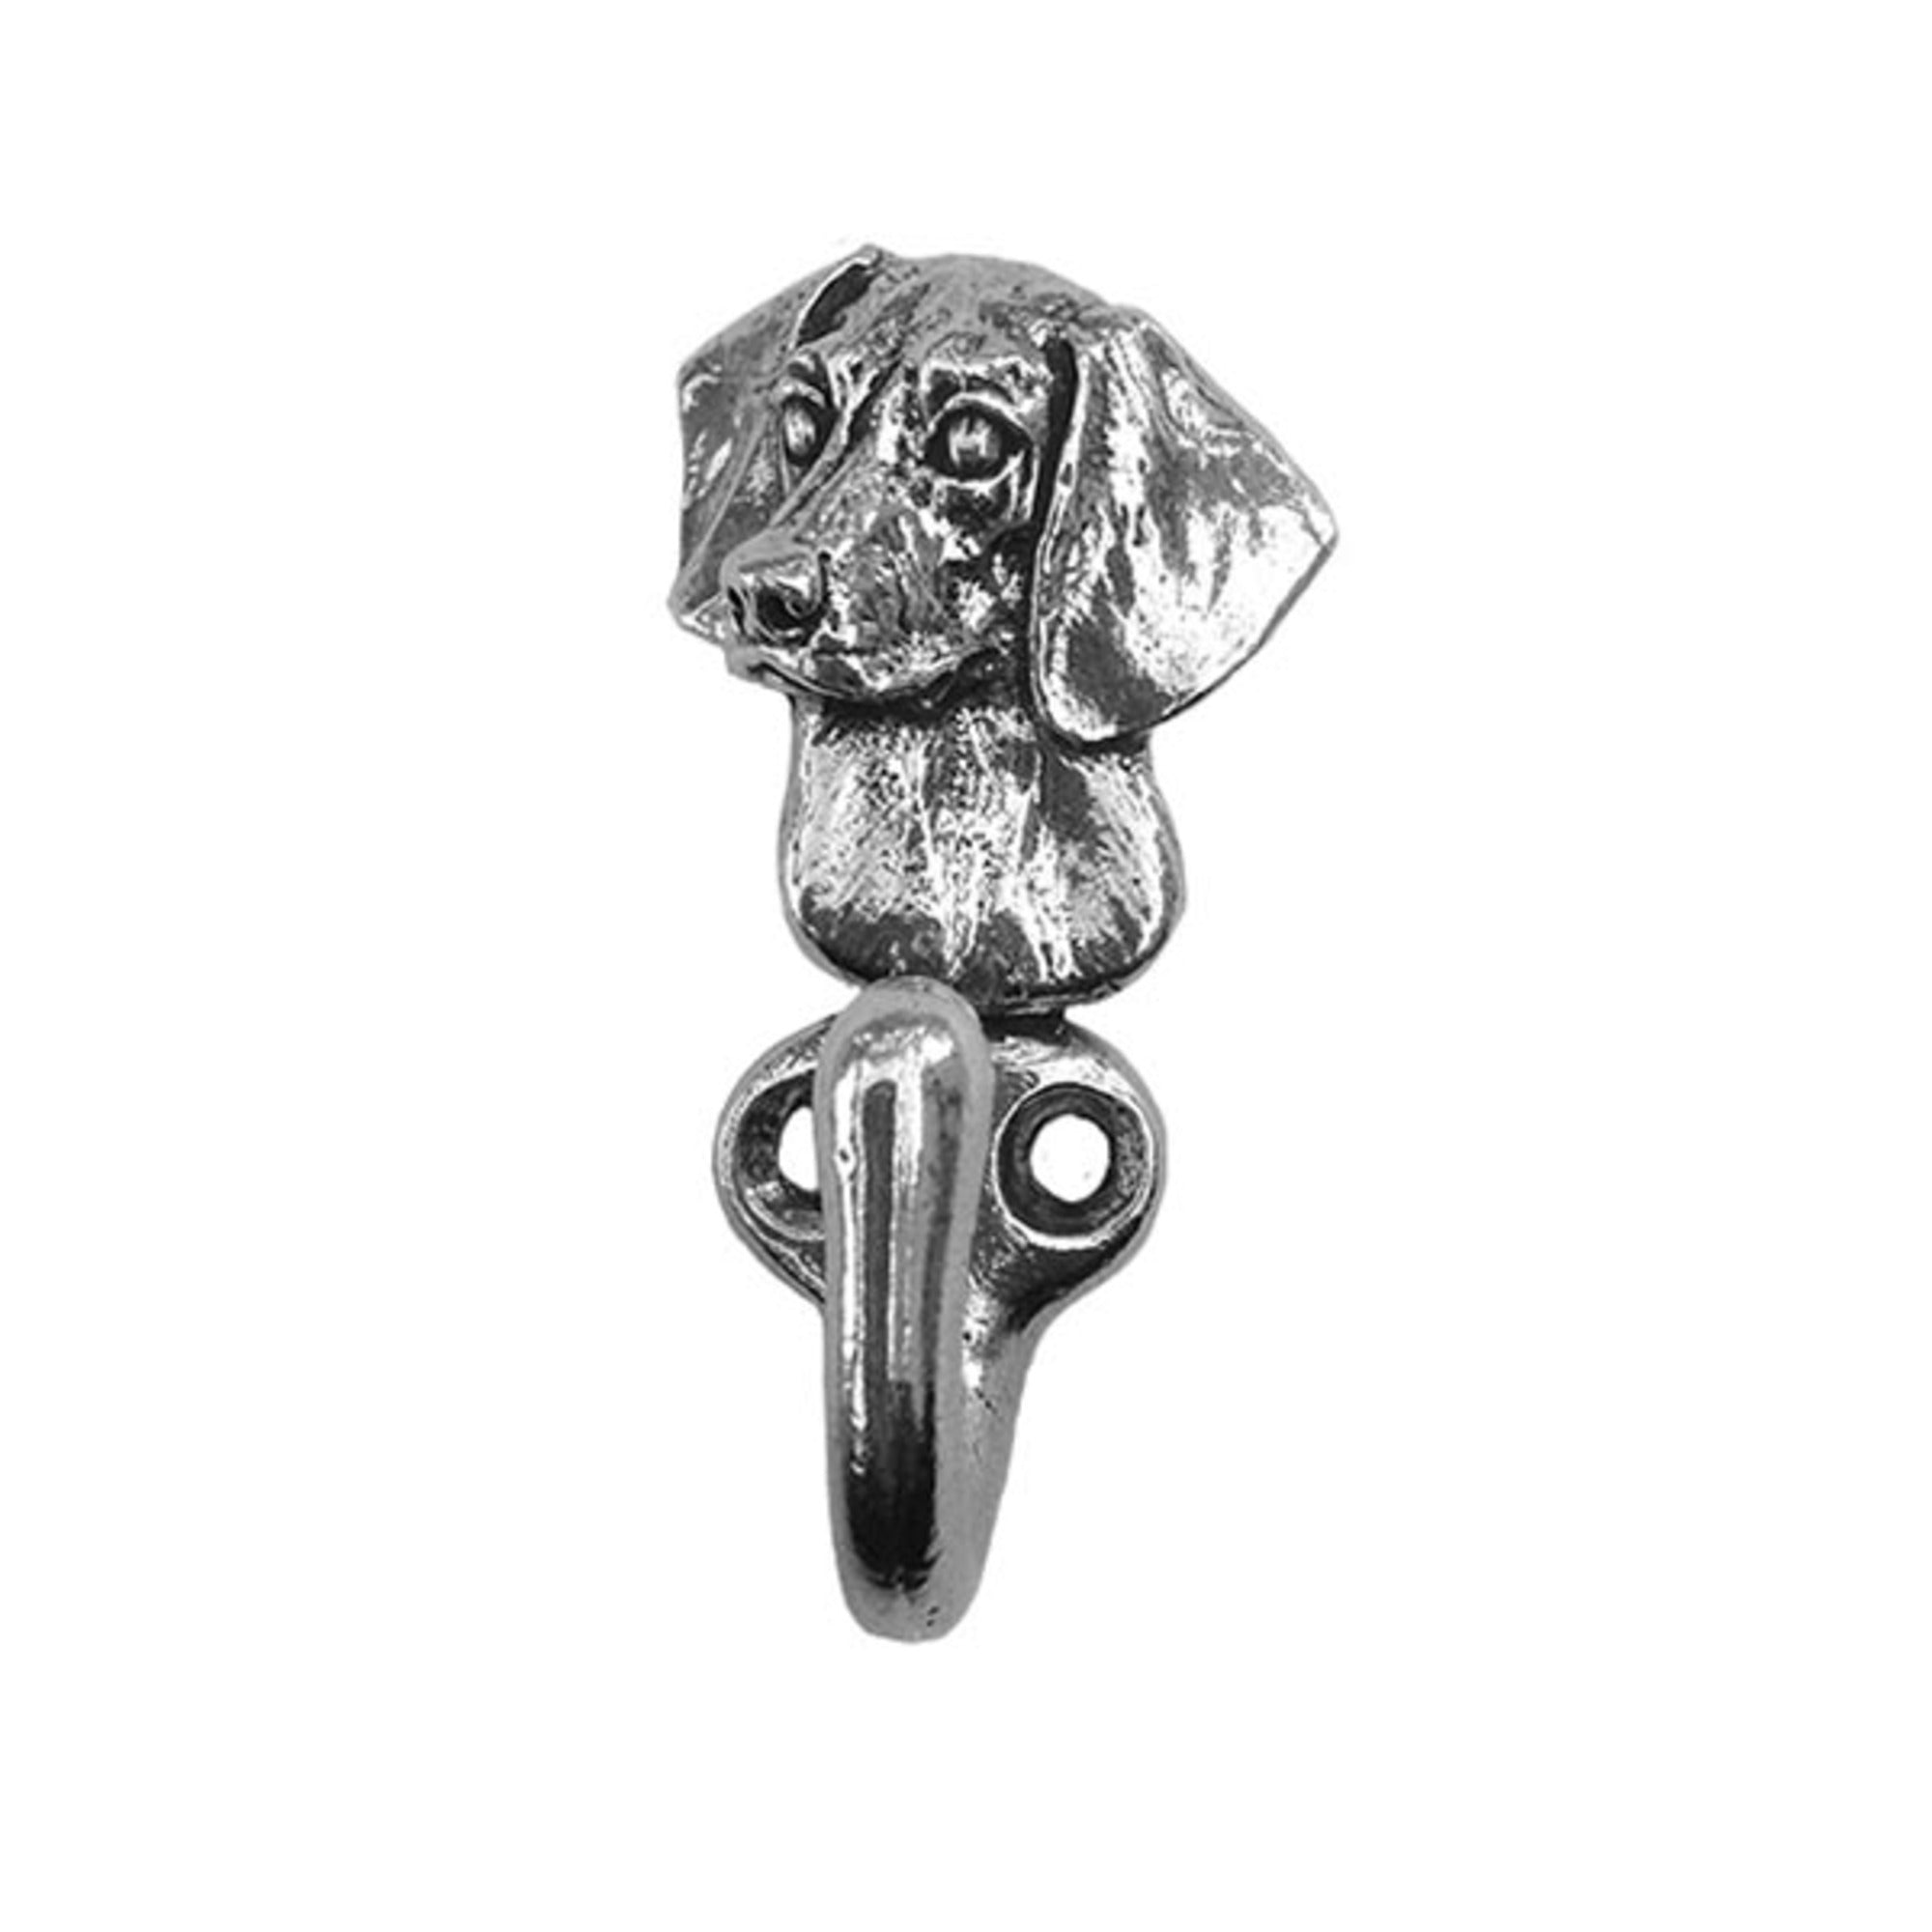 New-Spin Metal Casting Beagle Leash Hook